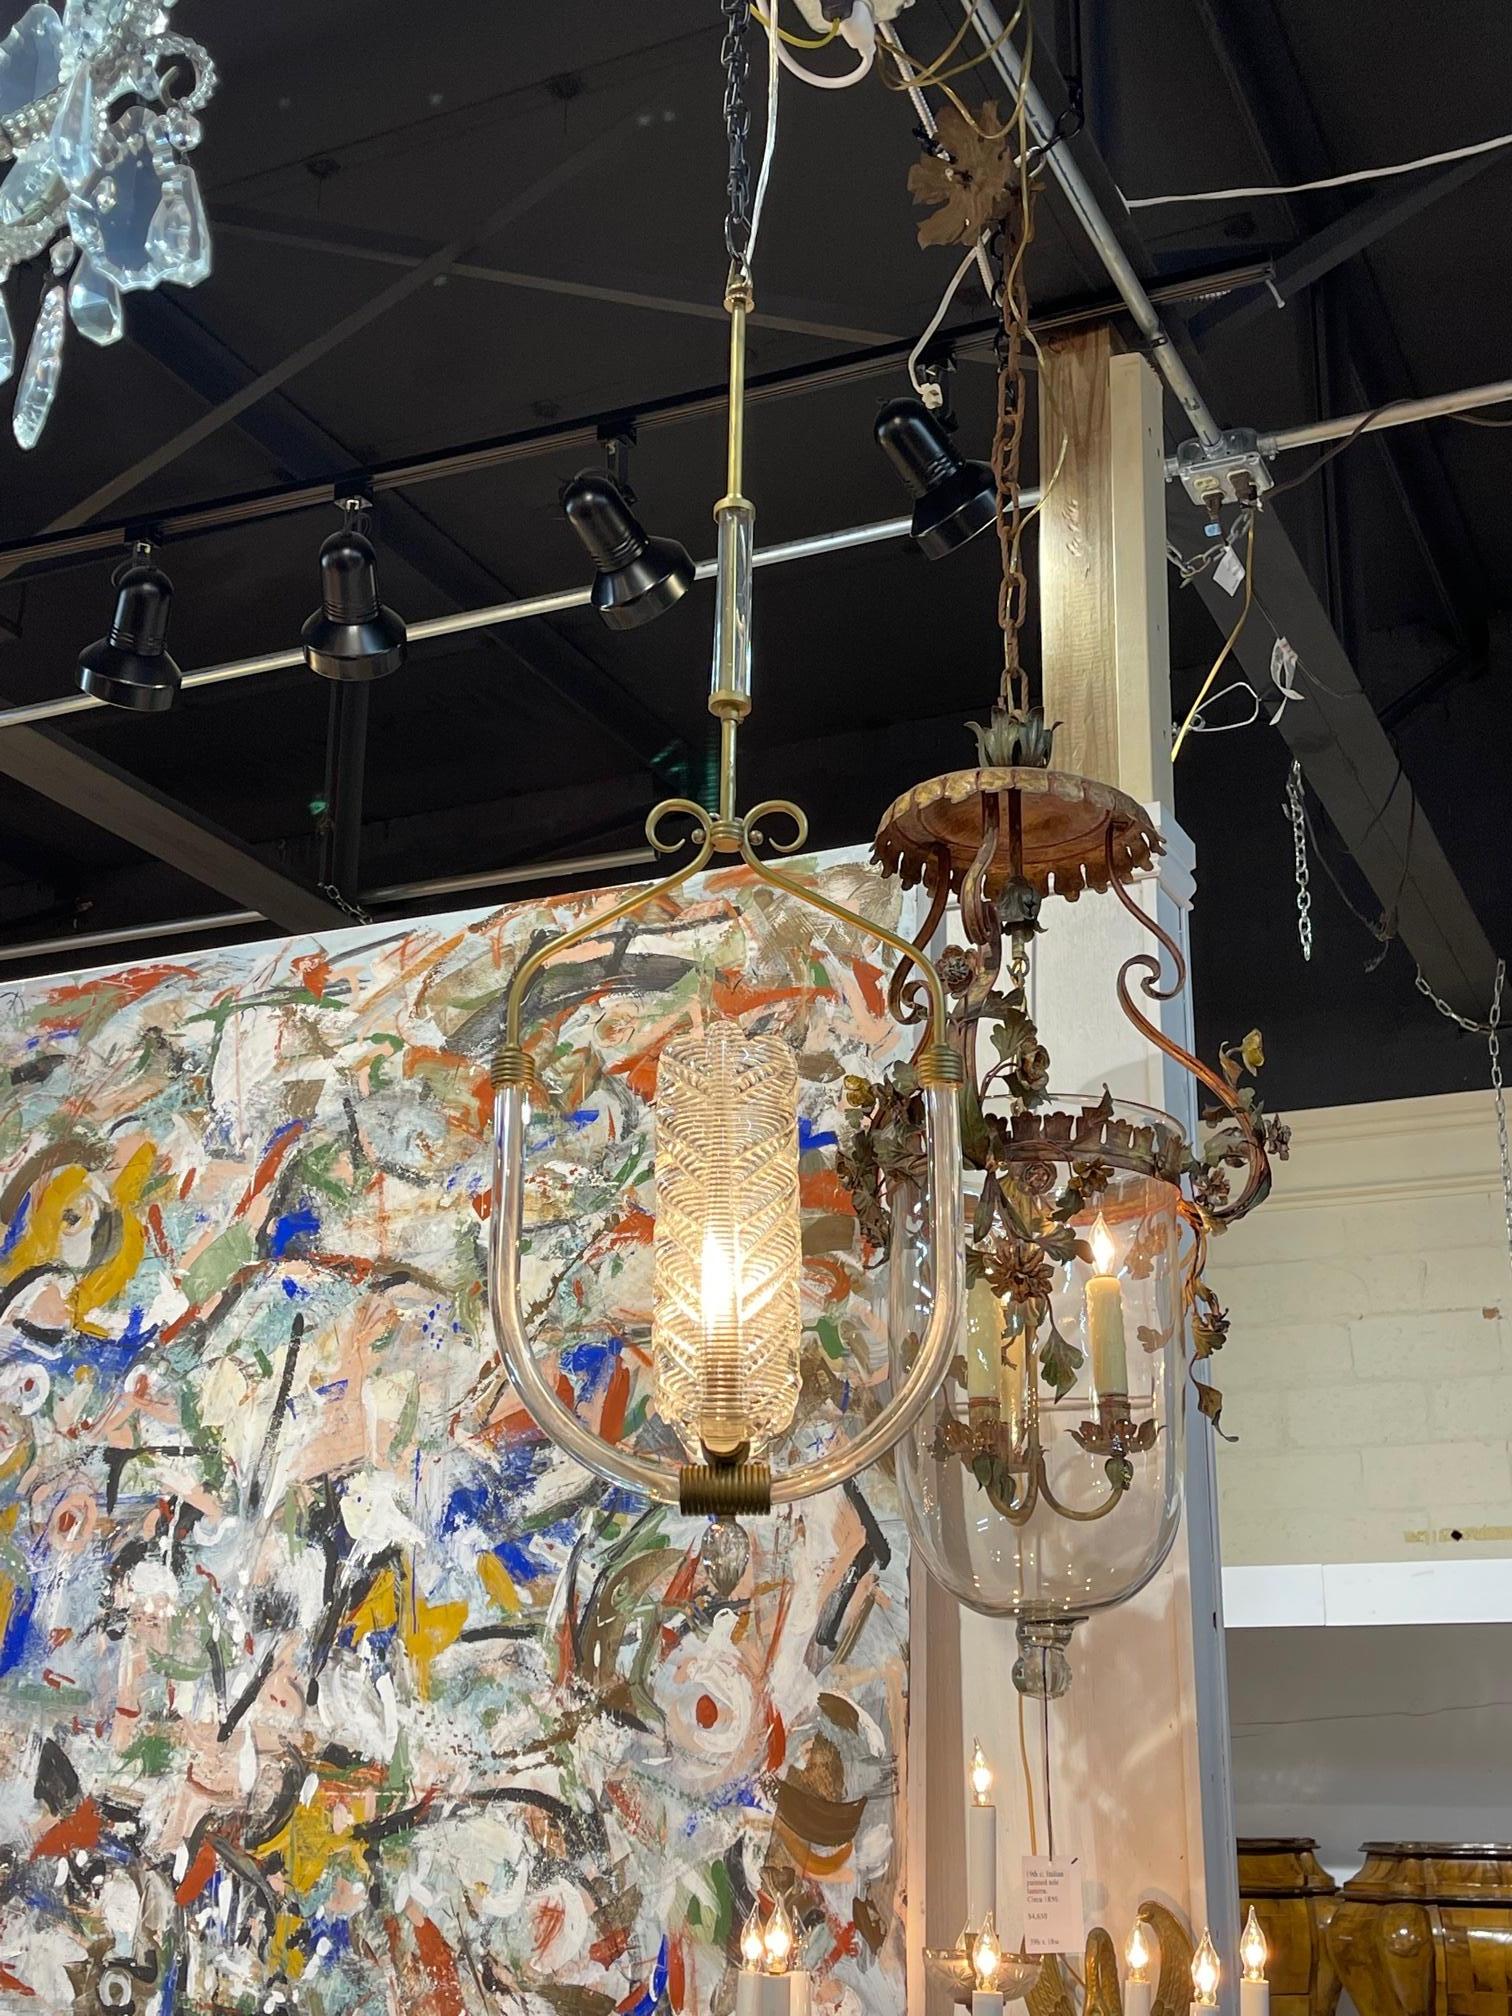 Decorative vintage Murano glass and brass pendant light after designers Barovier and Toso. Featuring beautiful textured glass. Very special!